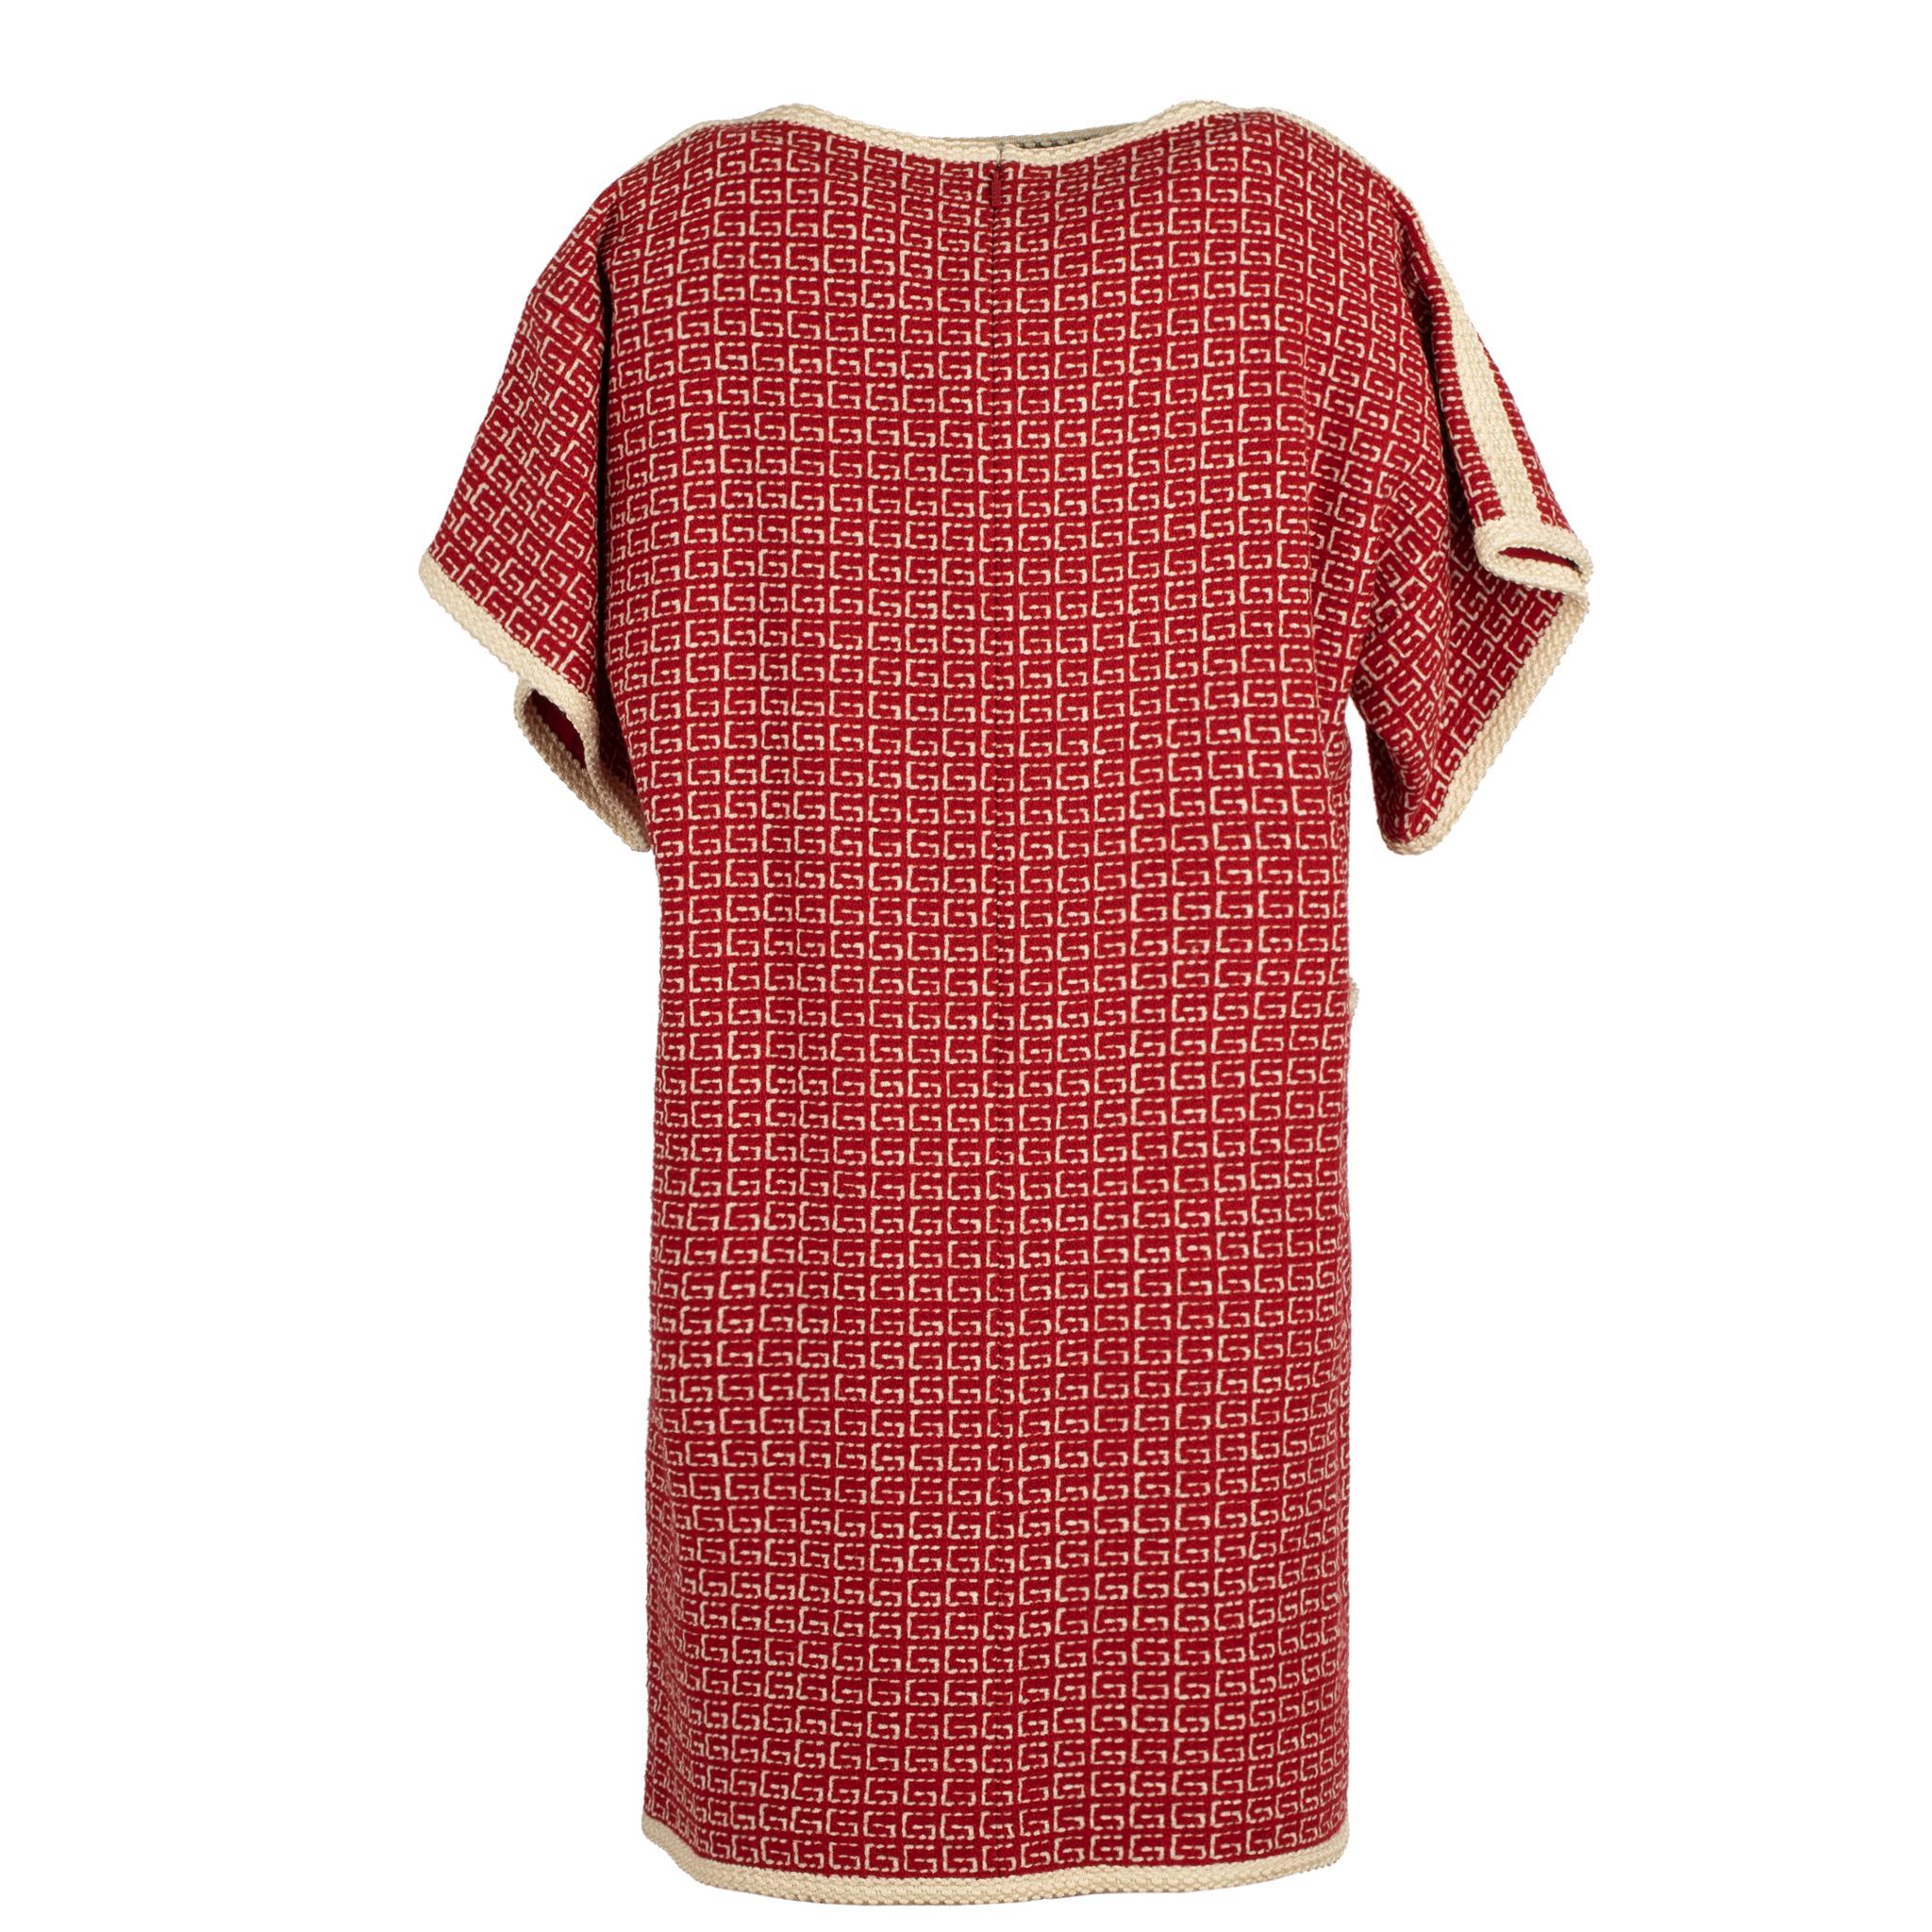 Gucci Tweed Red & Off-White Tunic Dress 38 IT For Sale 10